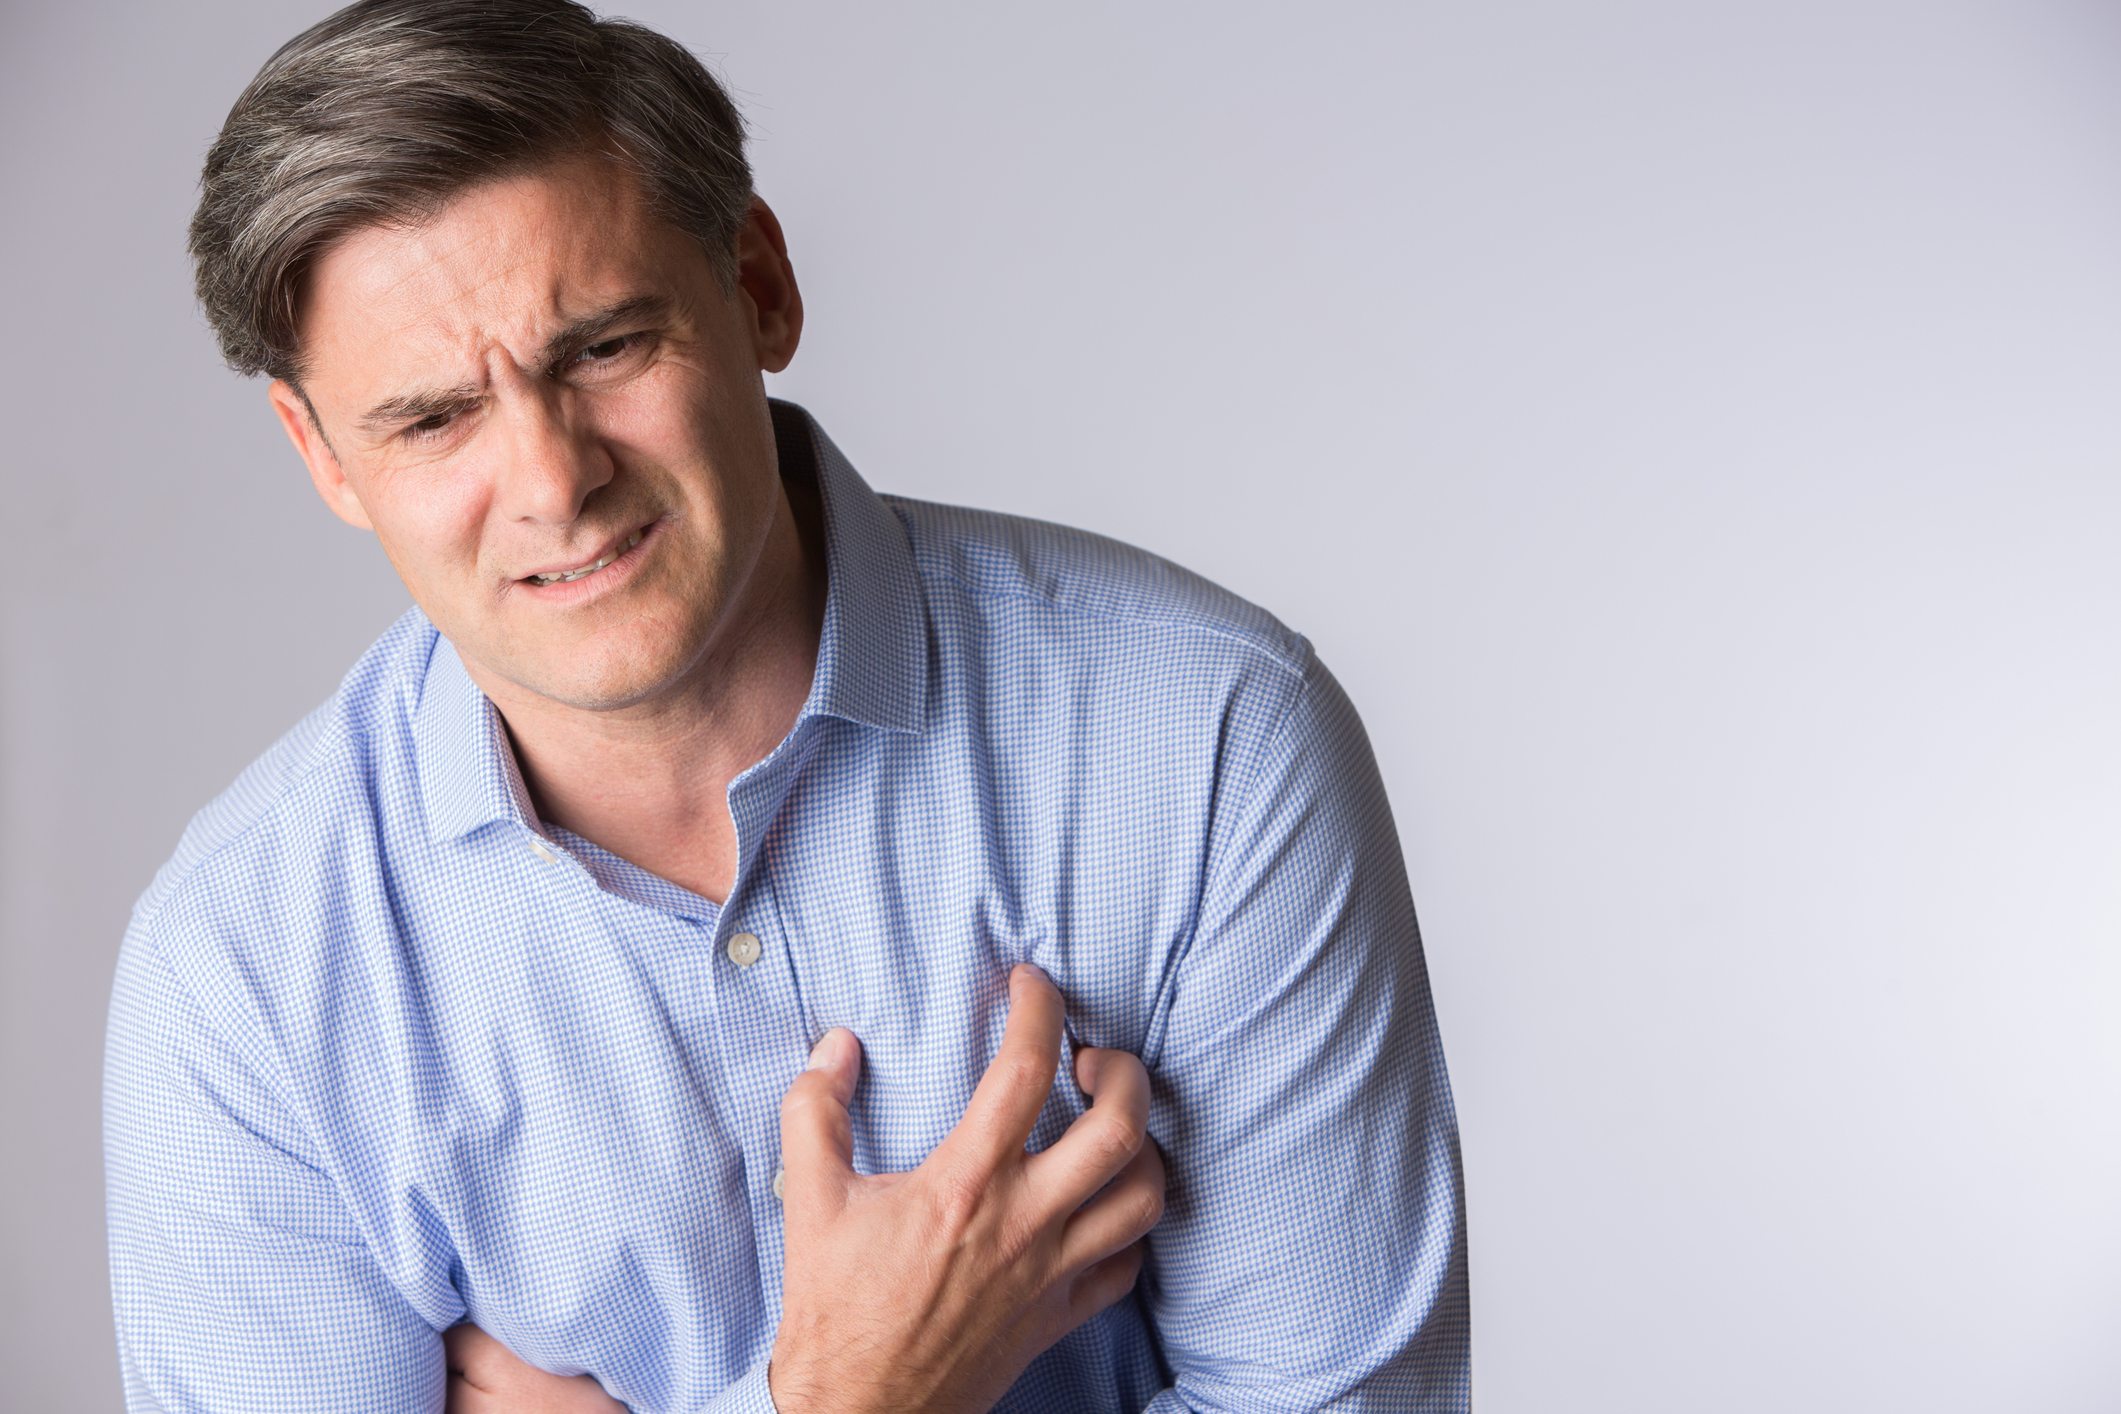 Chest pain: Common causes and sy...